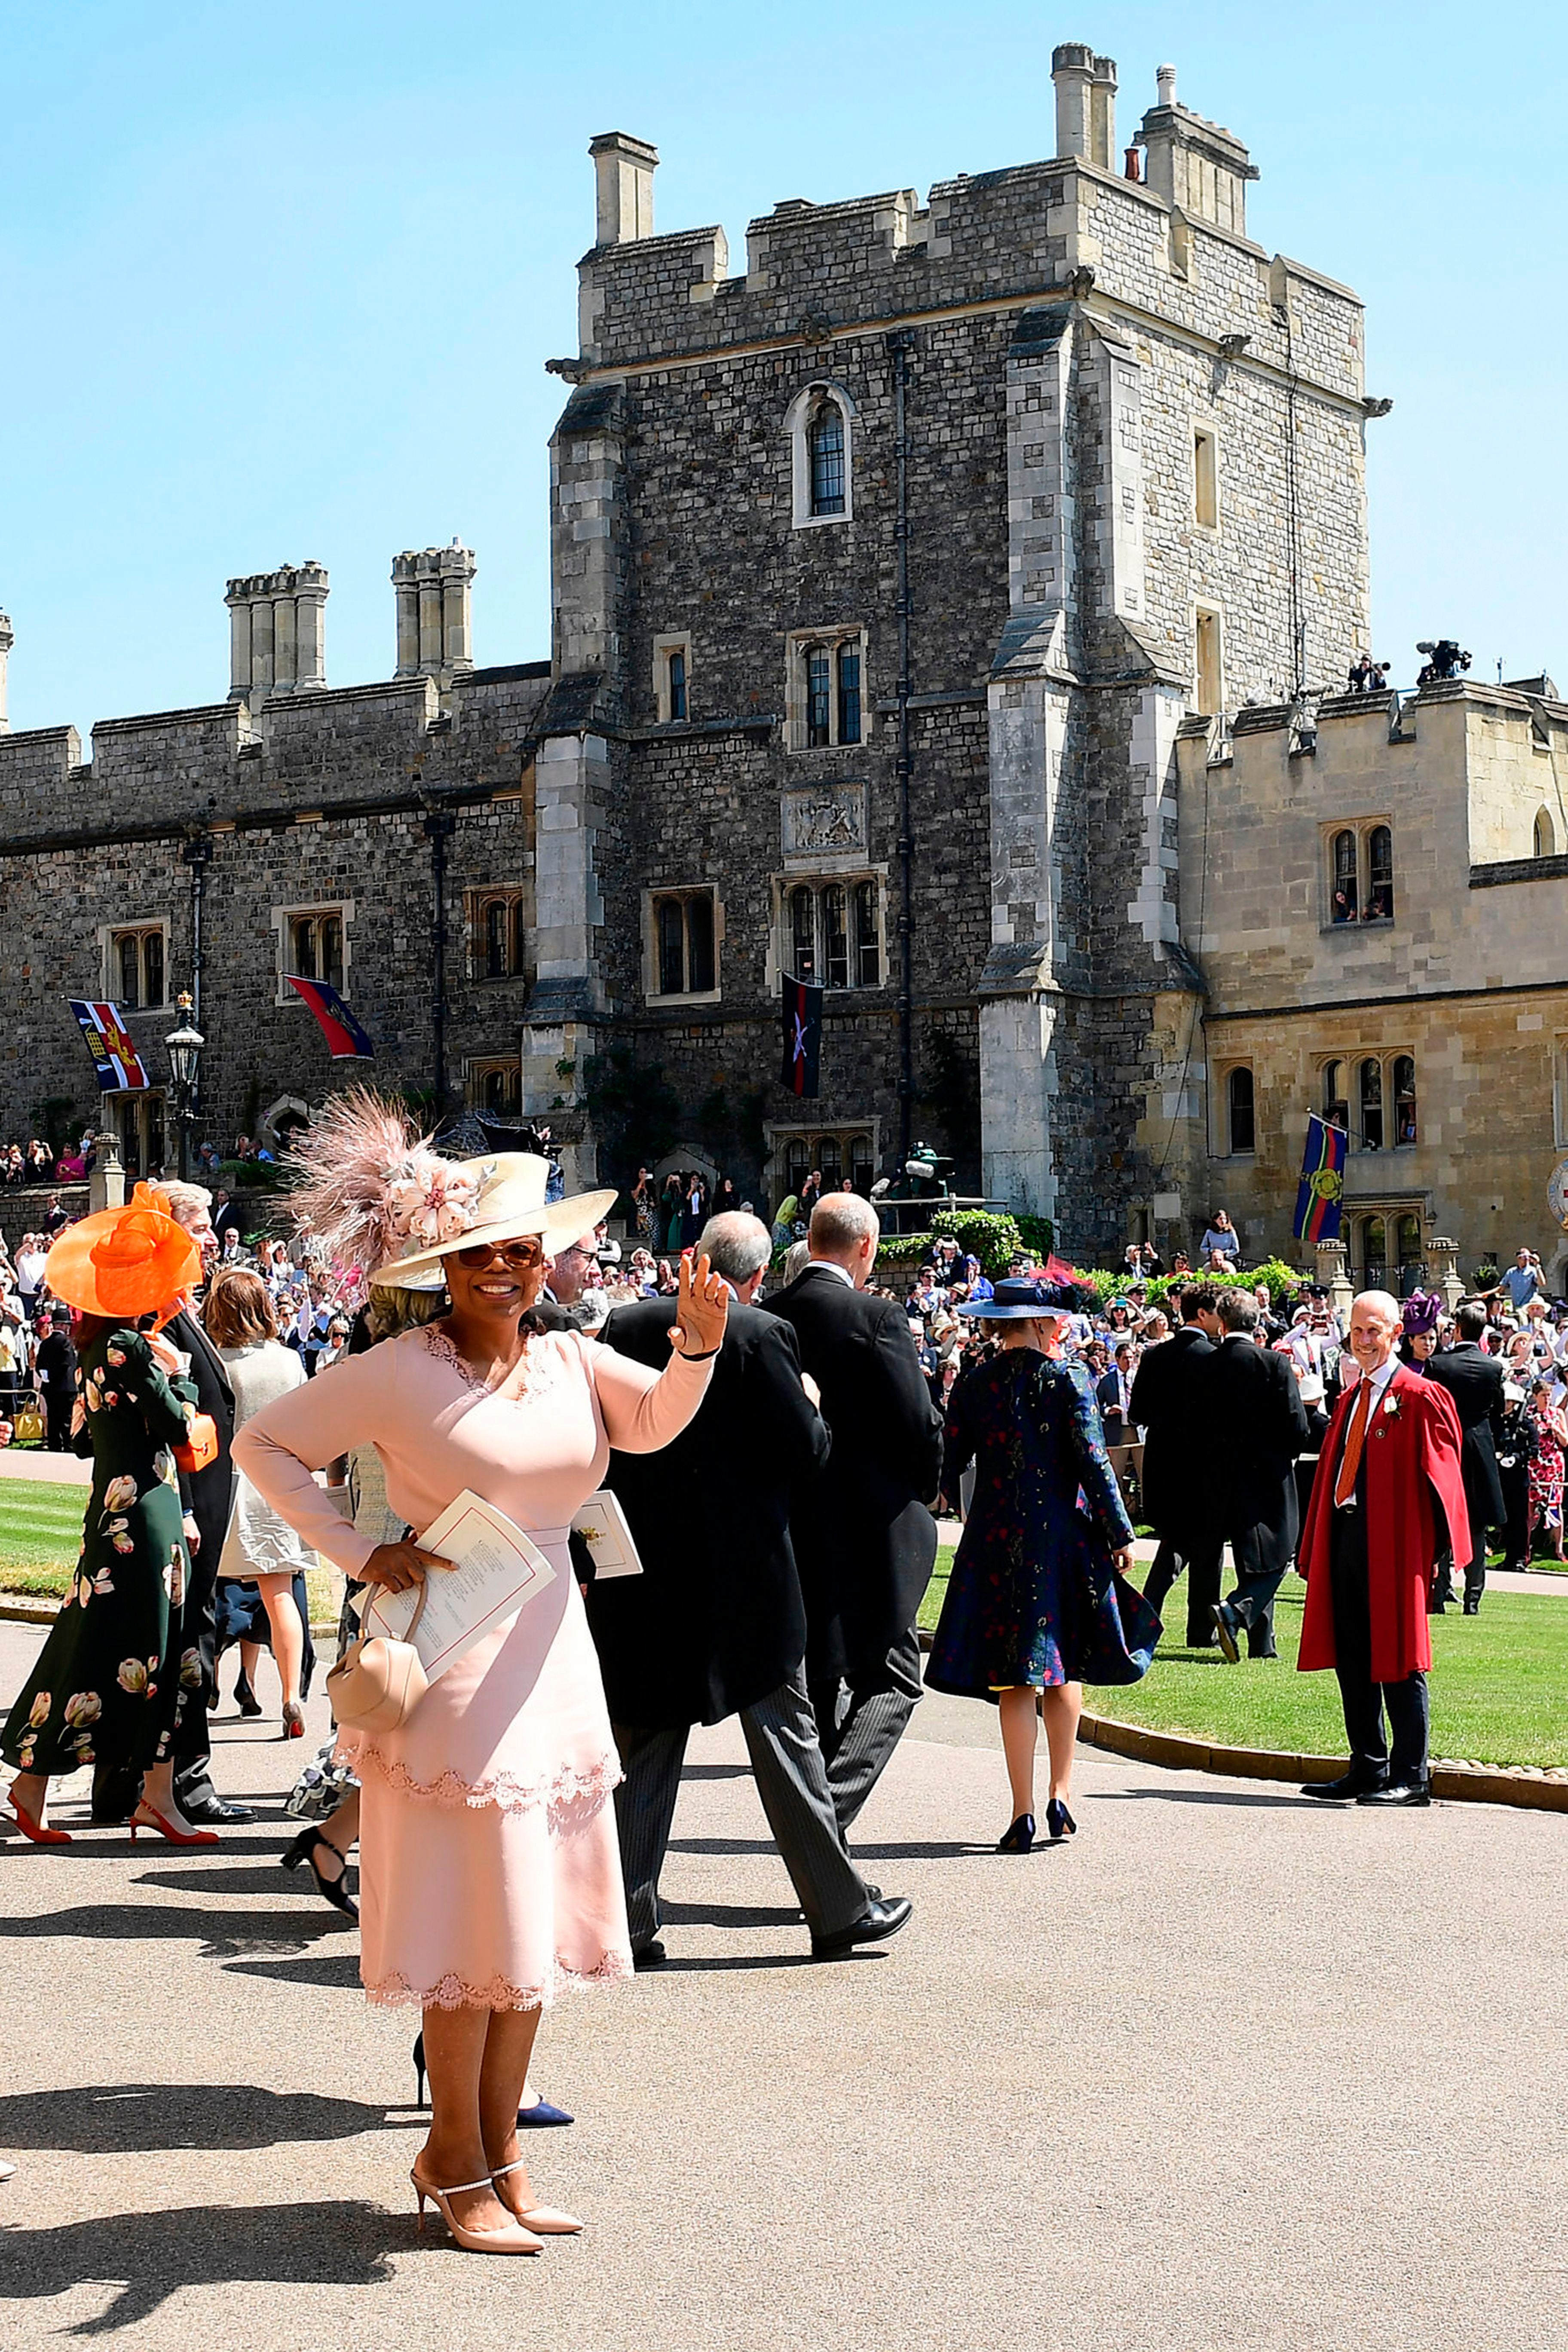 The Royal Wedding Celebrity Guest List Was Filled With Black Excellence